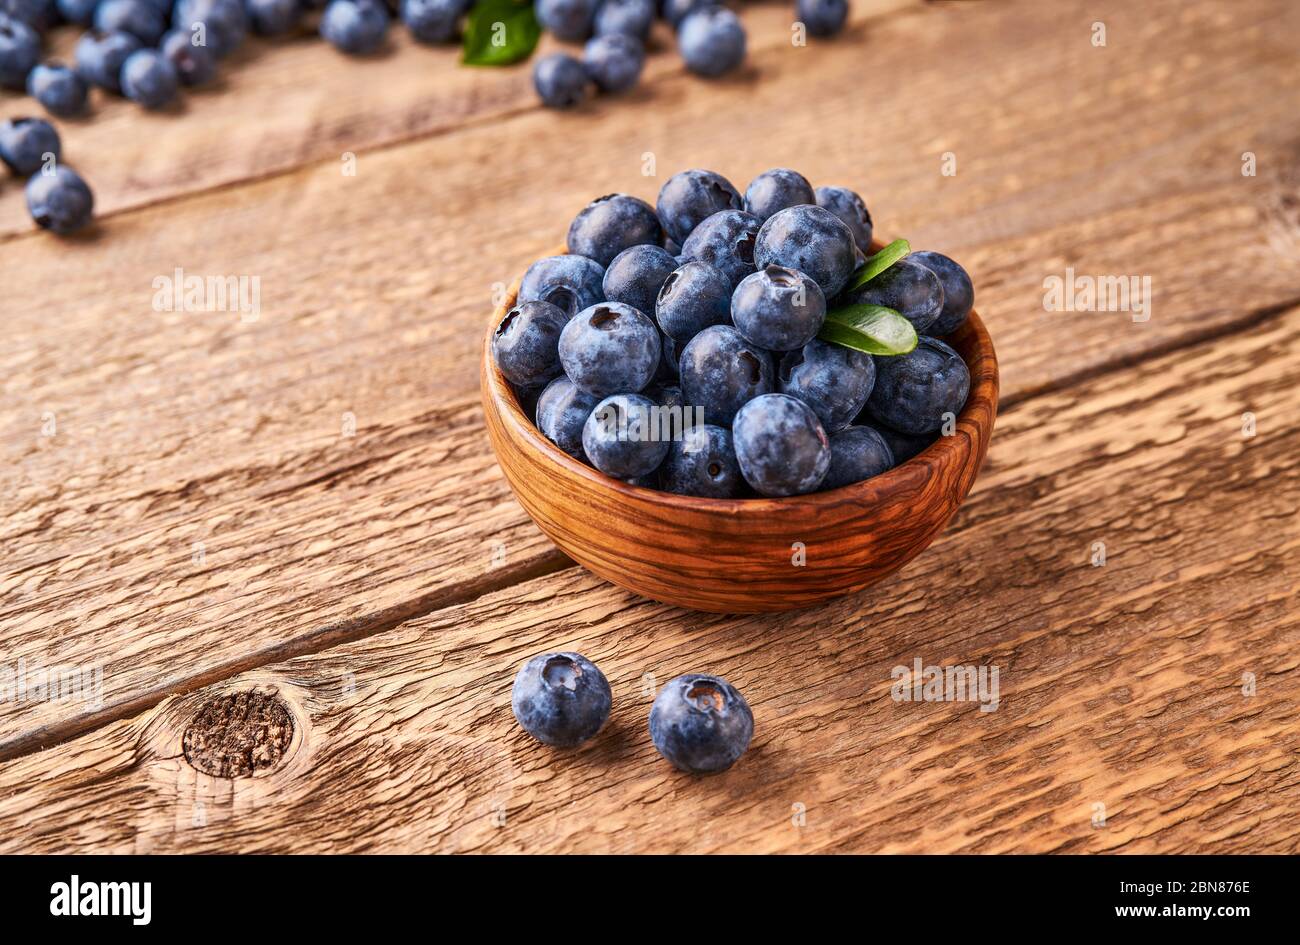 Fresh blueberries with blueberry leaves in wooden bowl on wooden background. Stock Photo